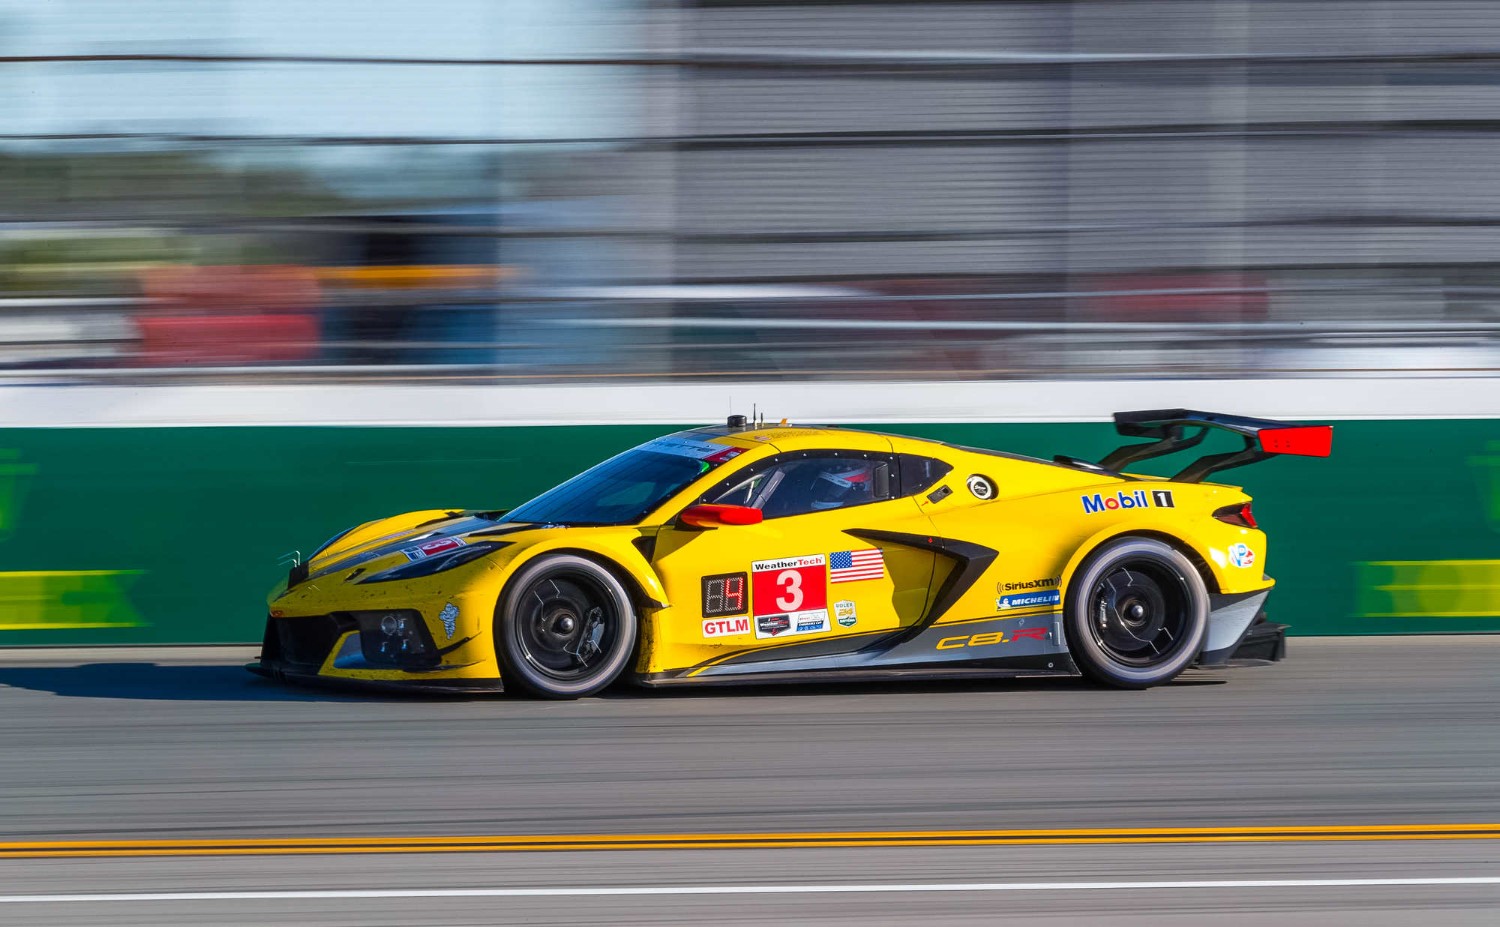 The Corvette C8.R looks faster than what it is so far